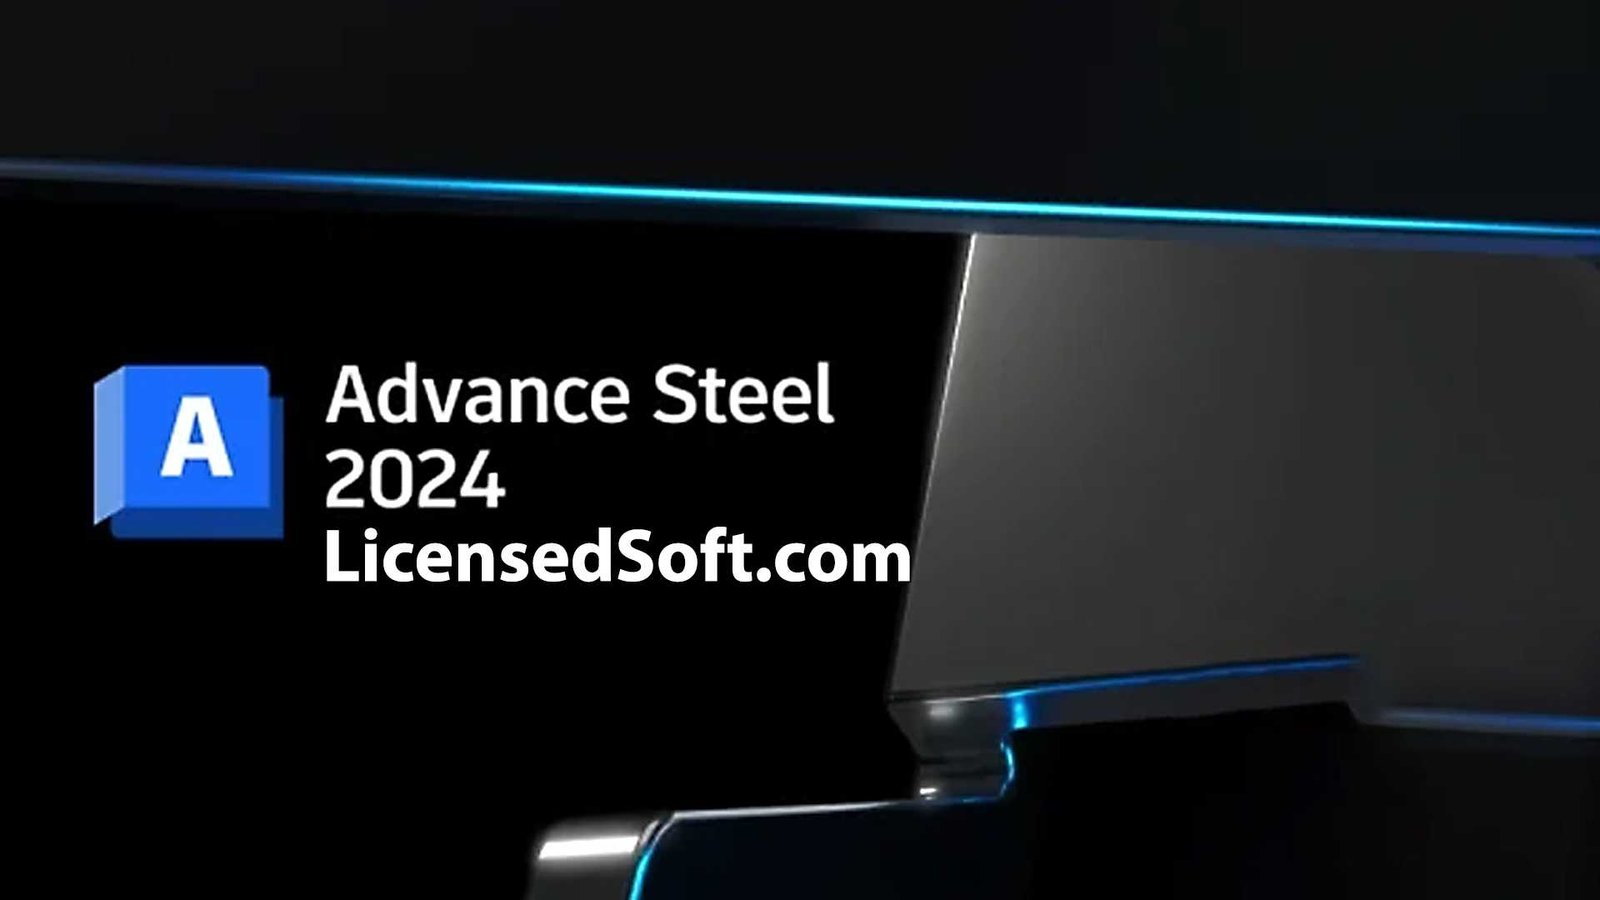 Autodesk Advance Steel 2024 Lifetime License Cover Image By LicensedSoft